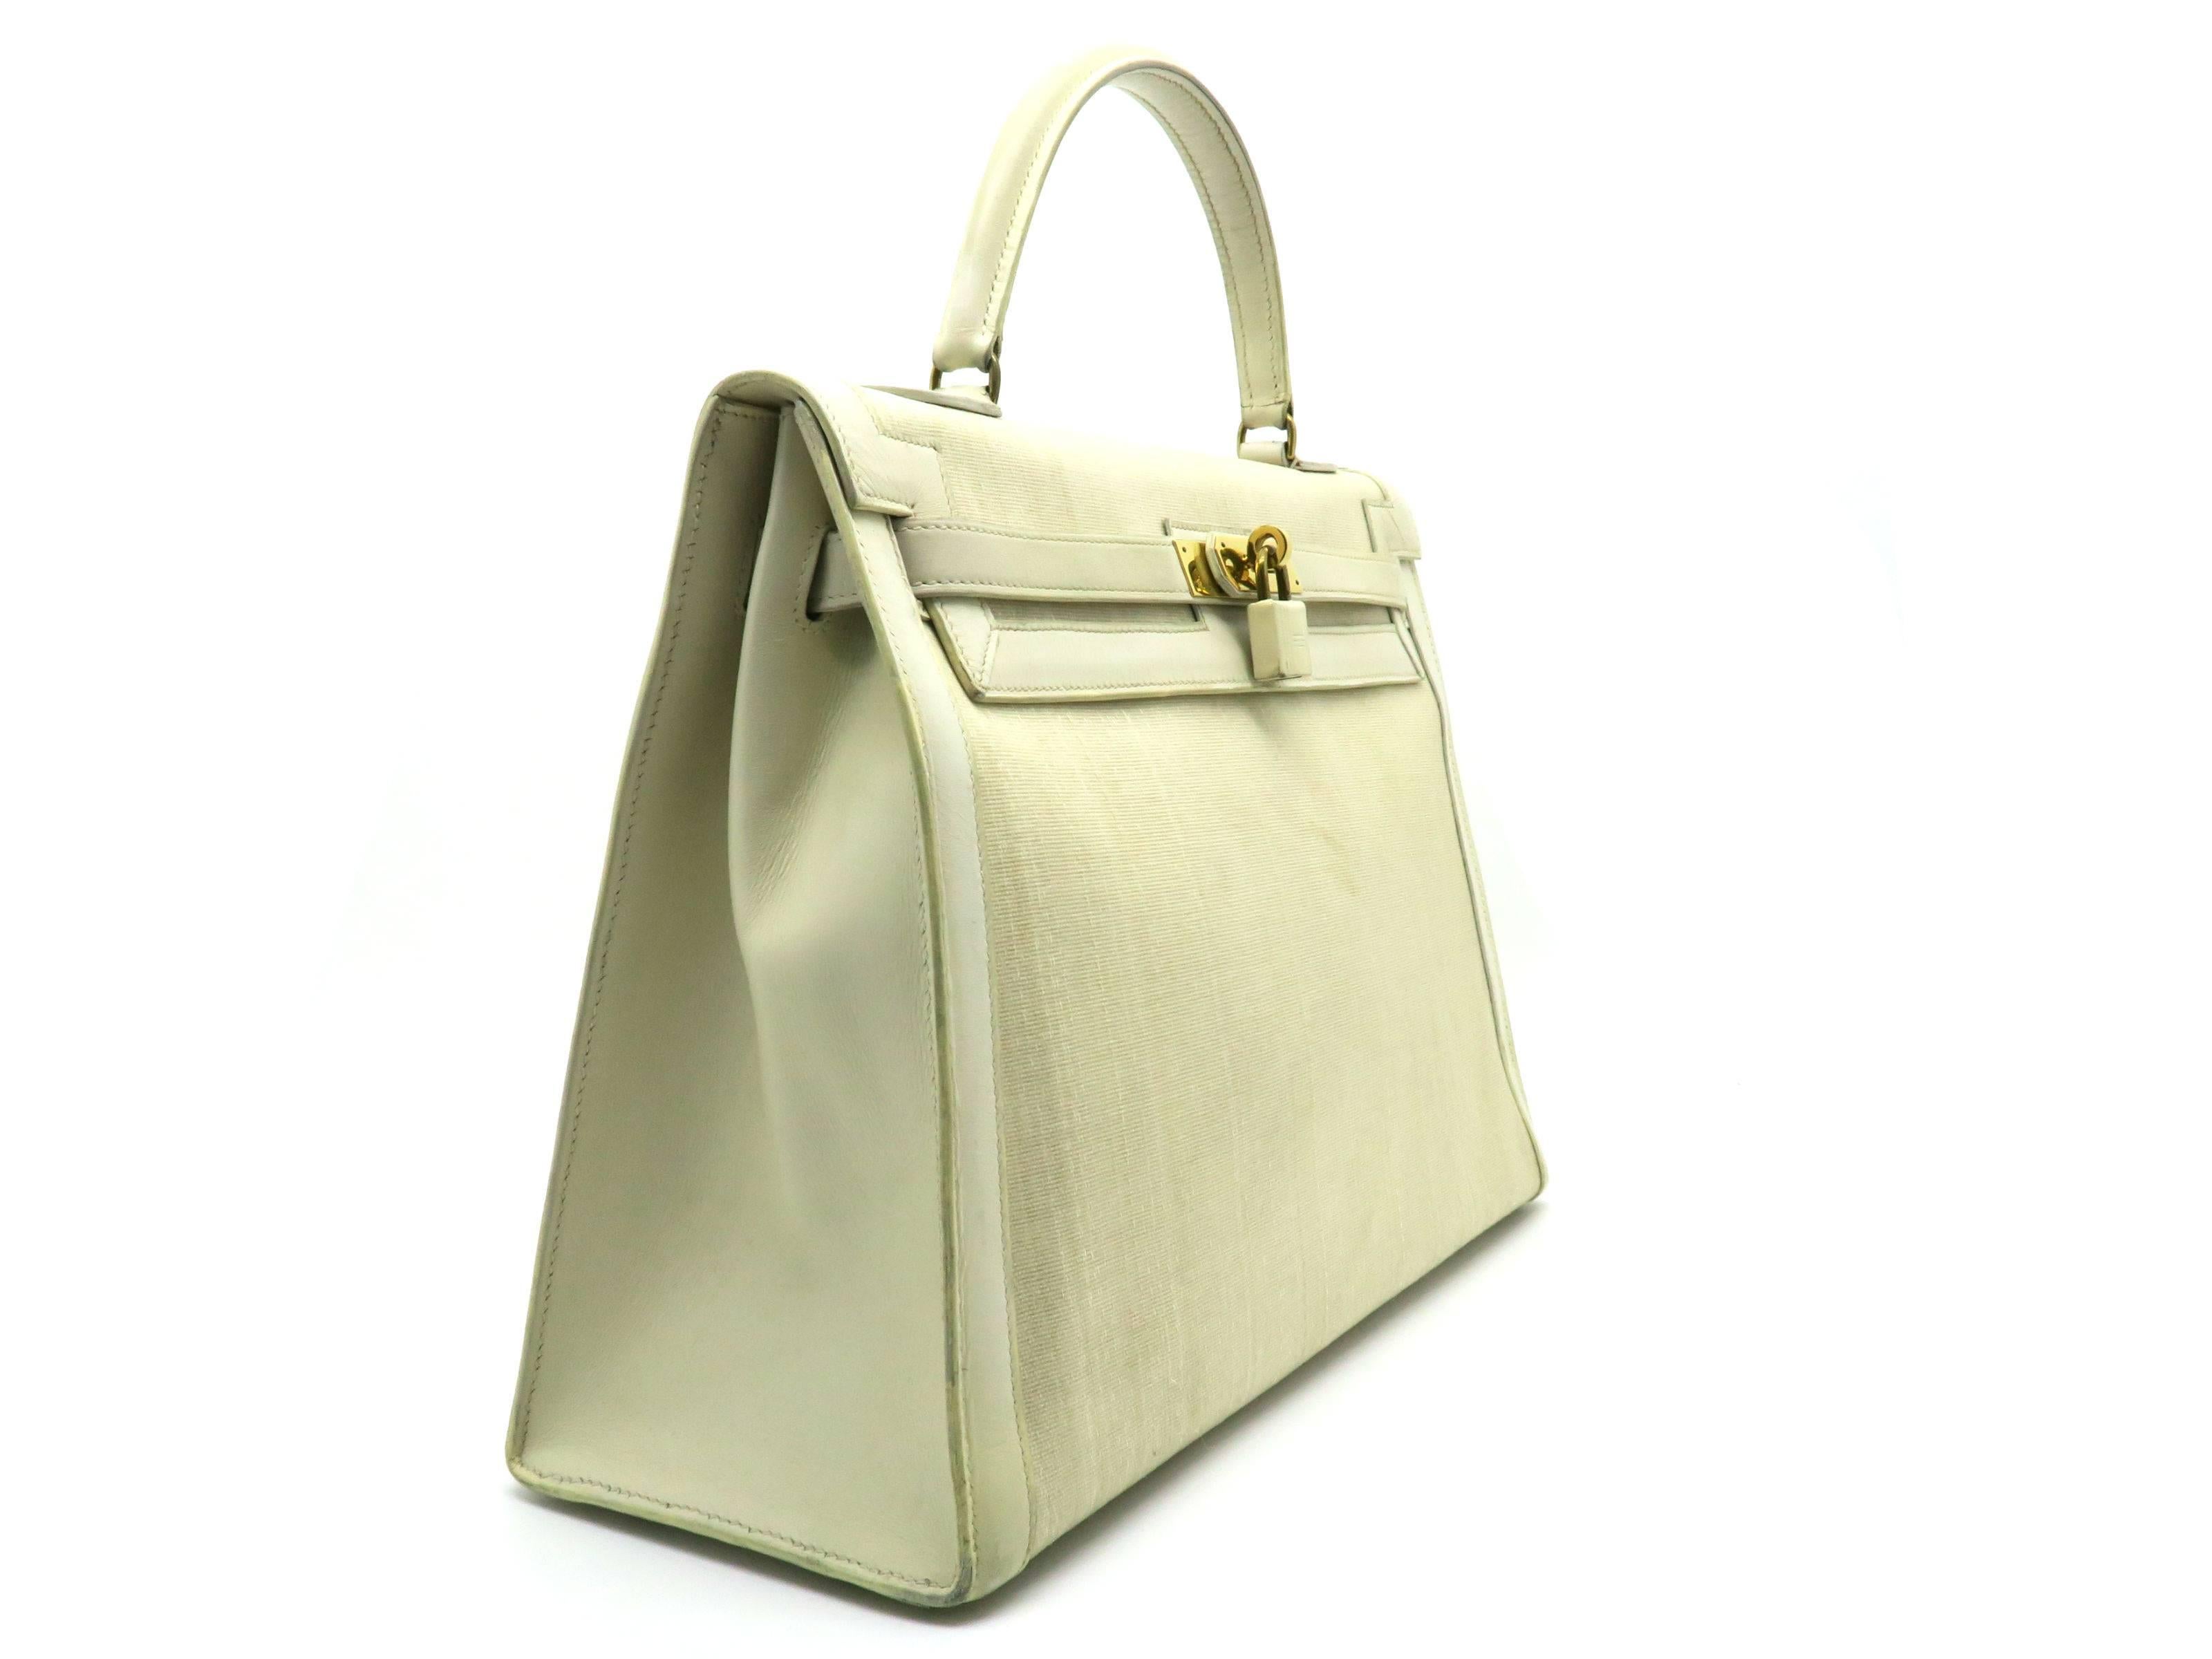 Color: Beige / Jaune Poussin (designer color) 

Material: Box Calf Leather and Canvas

Condition: Rank C 
Overall: Poor. Serious Defects. 
Surface: Obvious Scratches & Stains
Corners: Obvious Scratches & Stains
Edges: Minor Scratches &